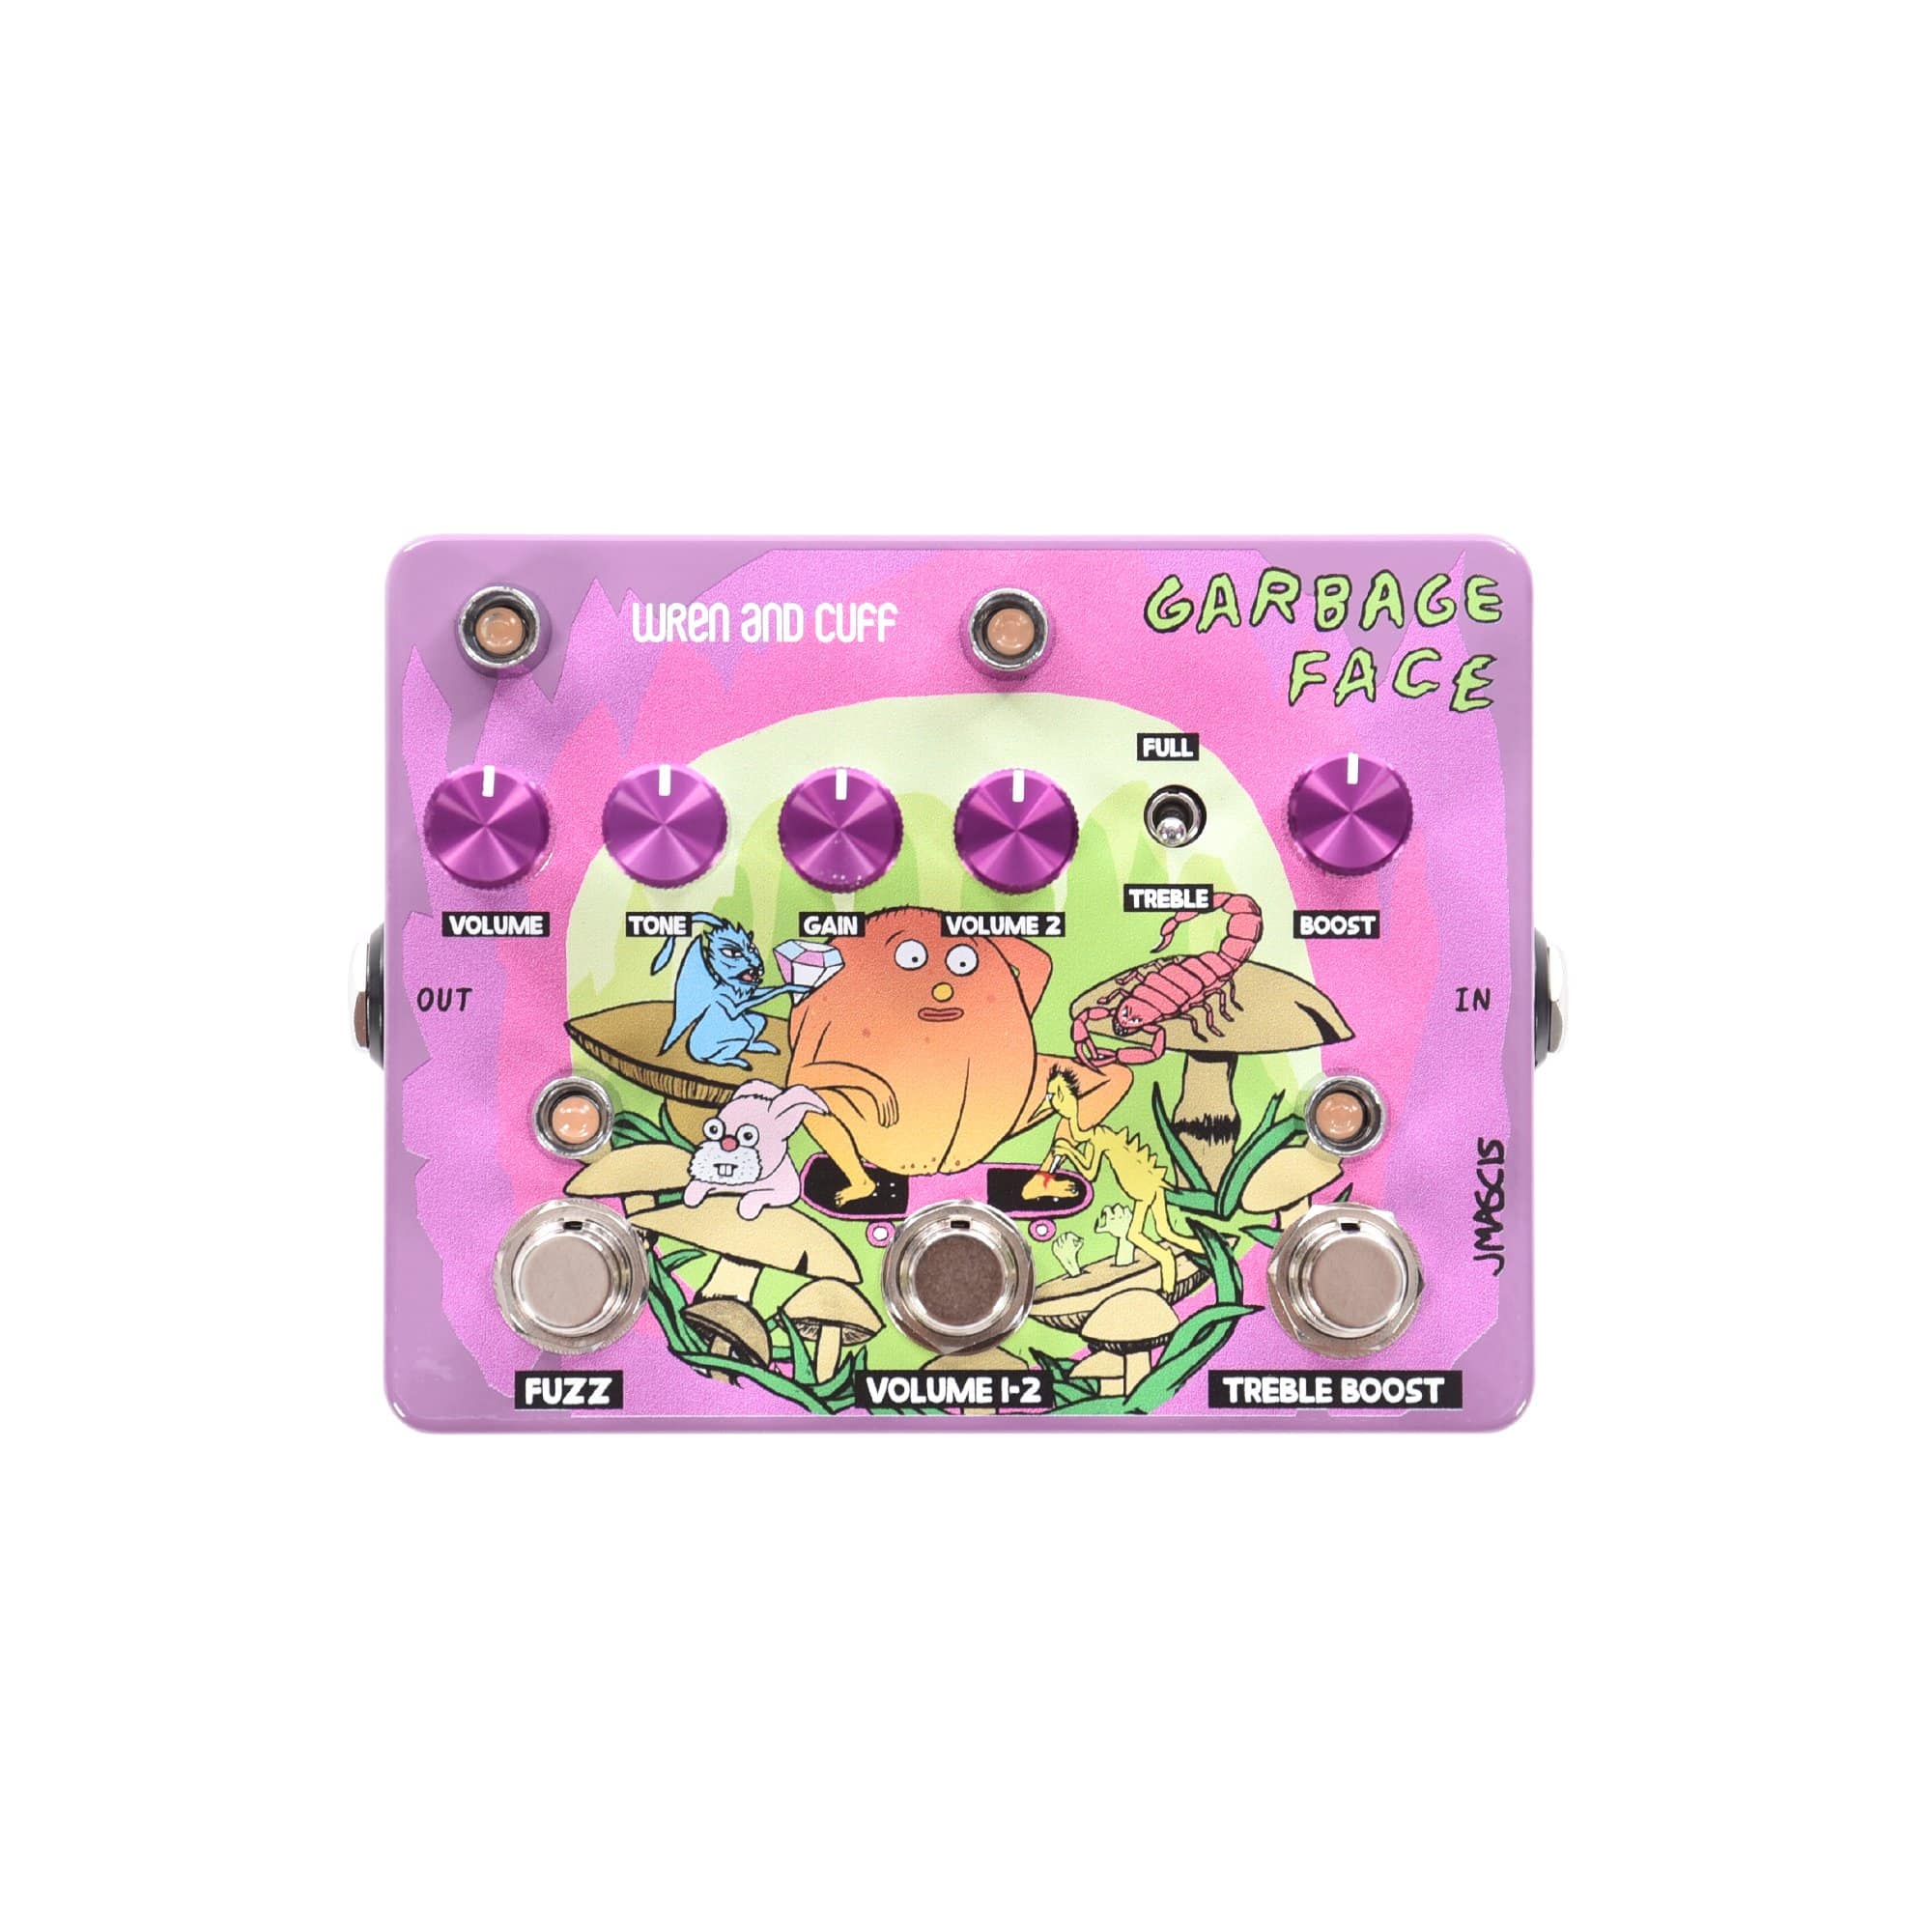 Wren and Cuff J Mascis Signature Garbage Face Fuzz Effects and Pedals / Fuzz